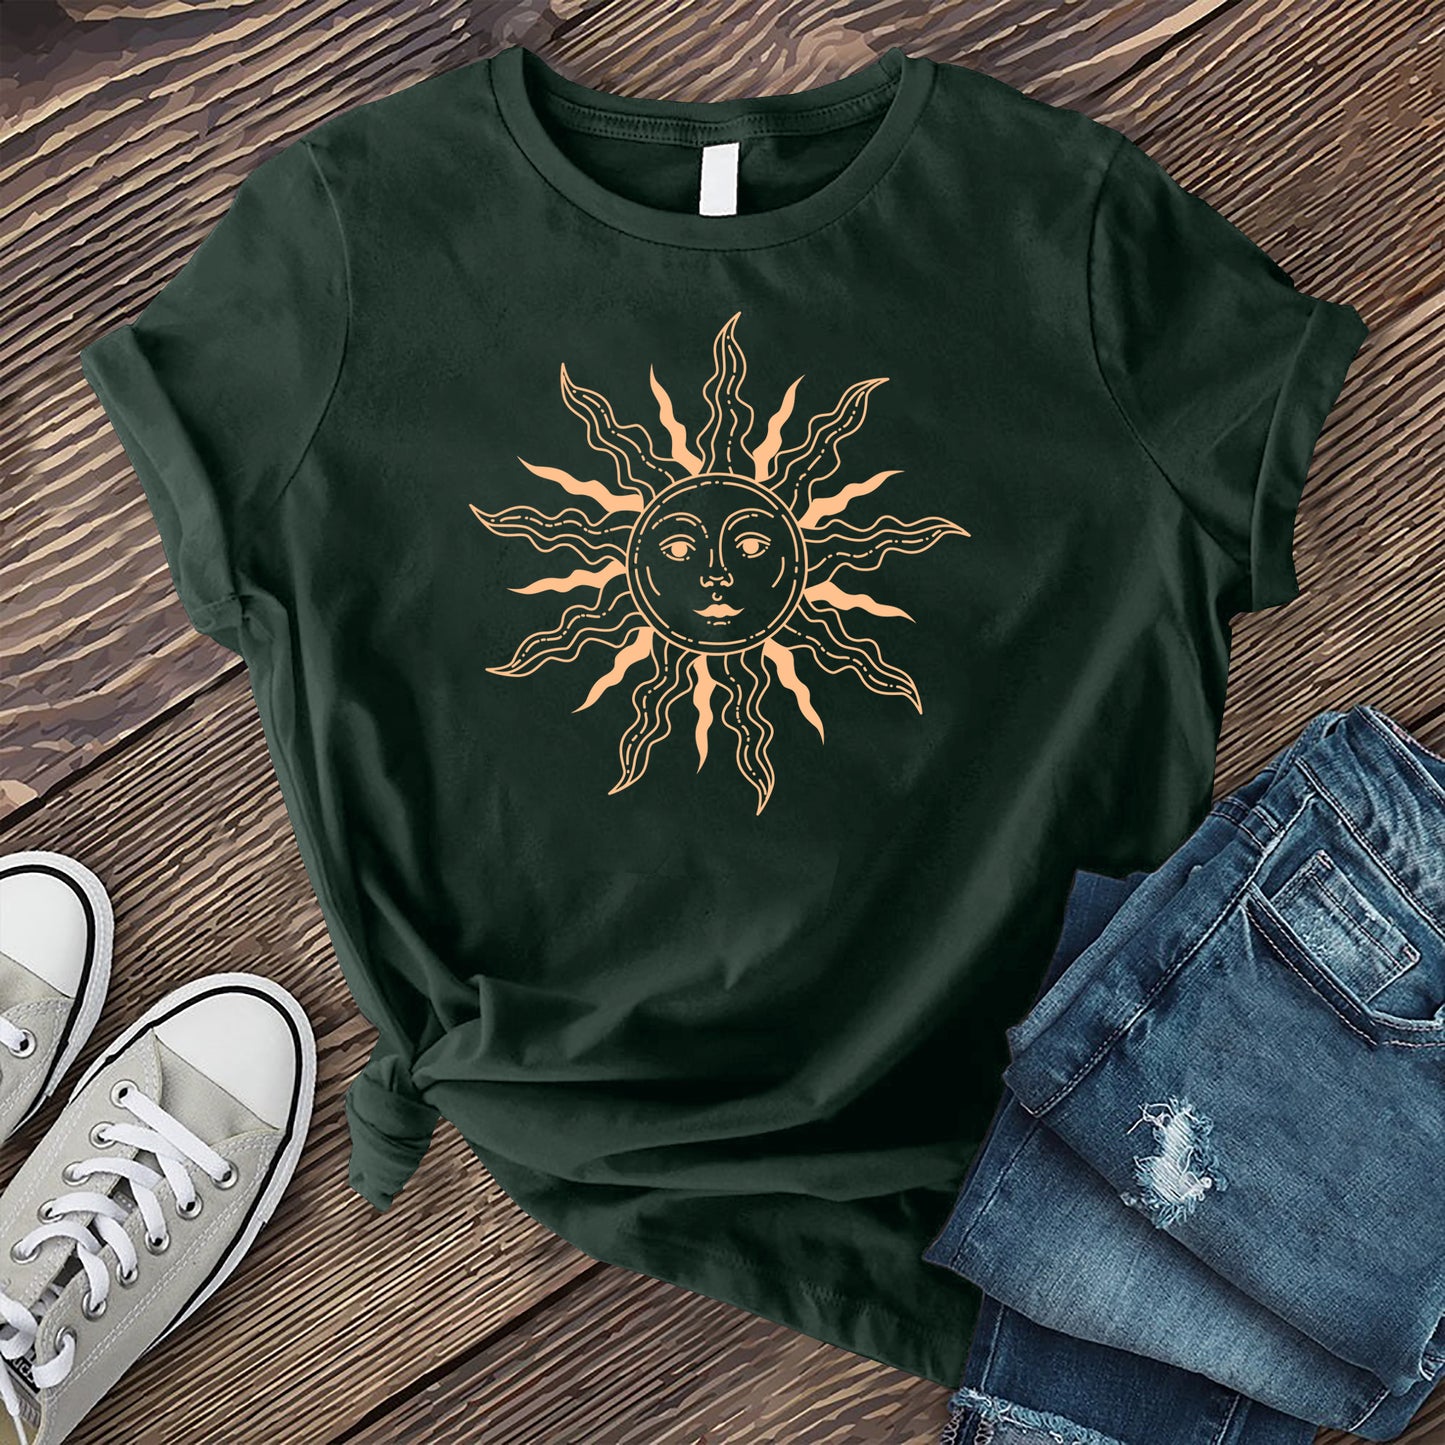 Sketched Sun T-shirt